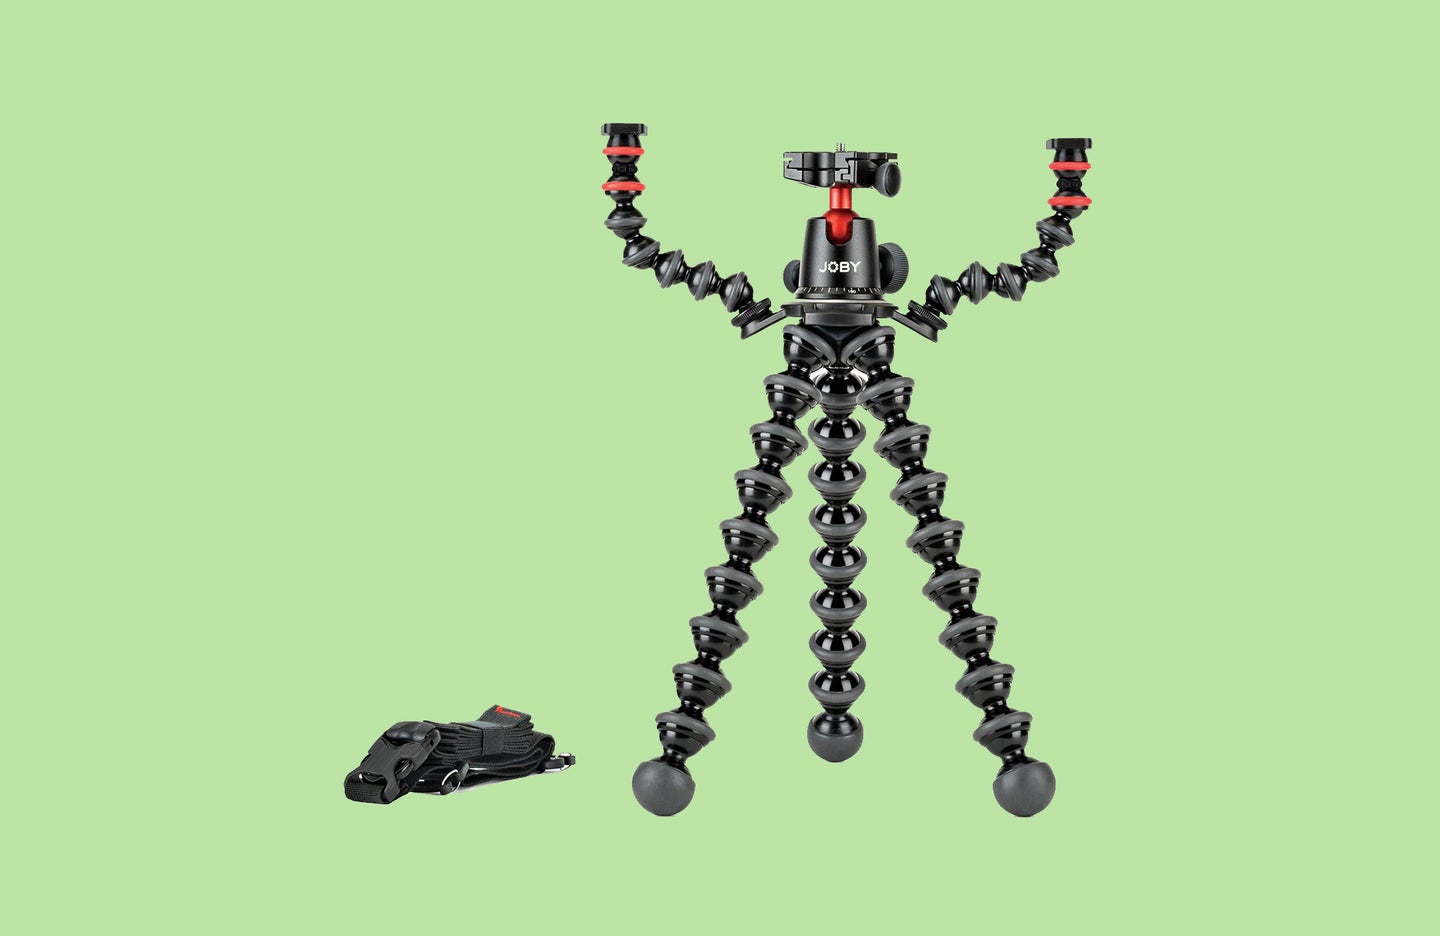 The JOBY GorillaPod 5K Kit is on sale at Adorama right now.